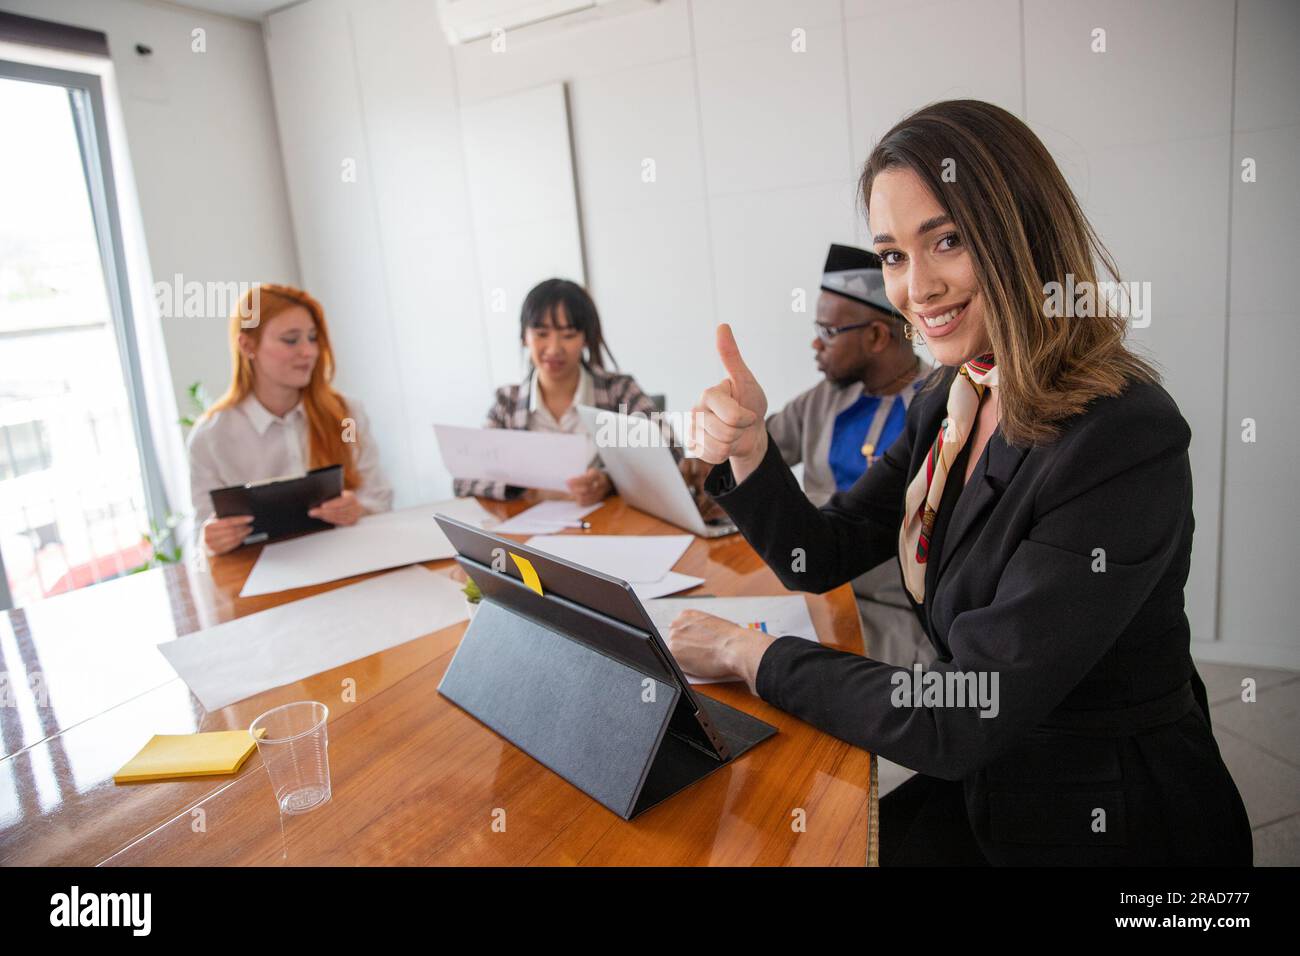 A businesswoman gives the thumbs up during a business meeting Stock Photo